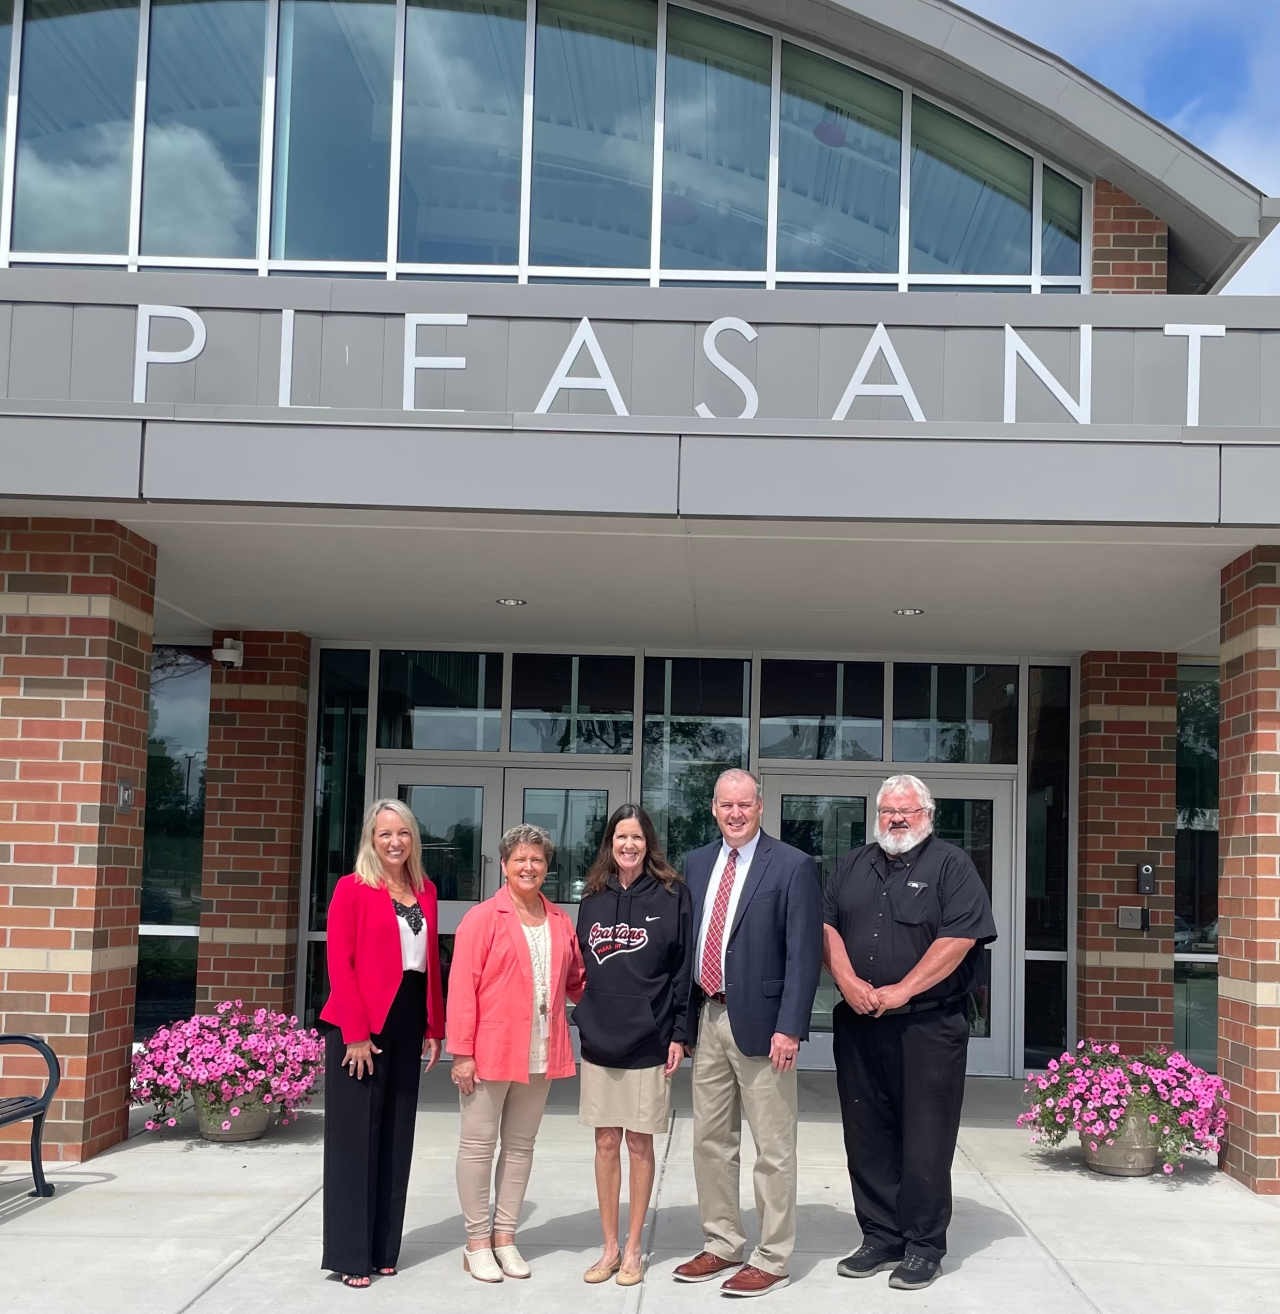 Representative Richardson joined a tour of the Pleasant Local Schools district for an update.